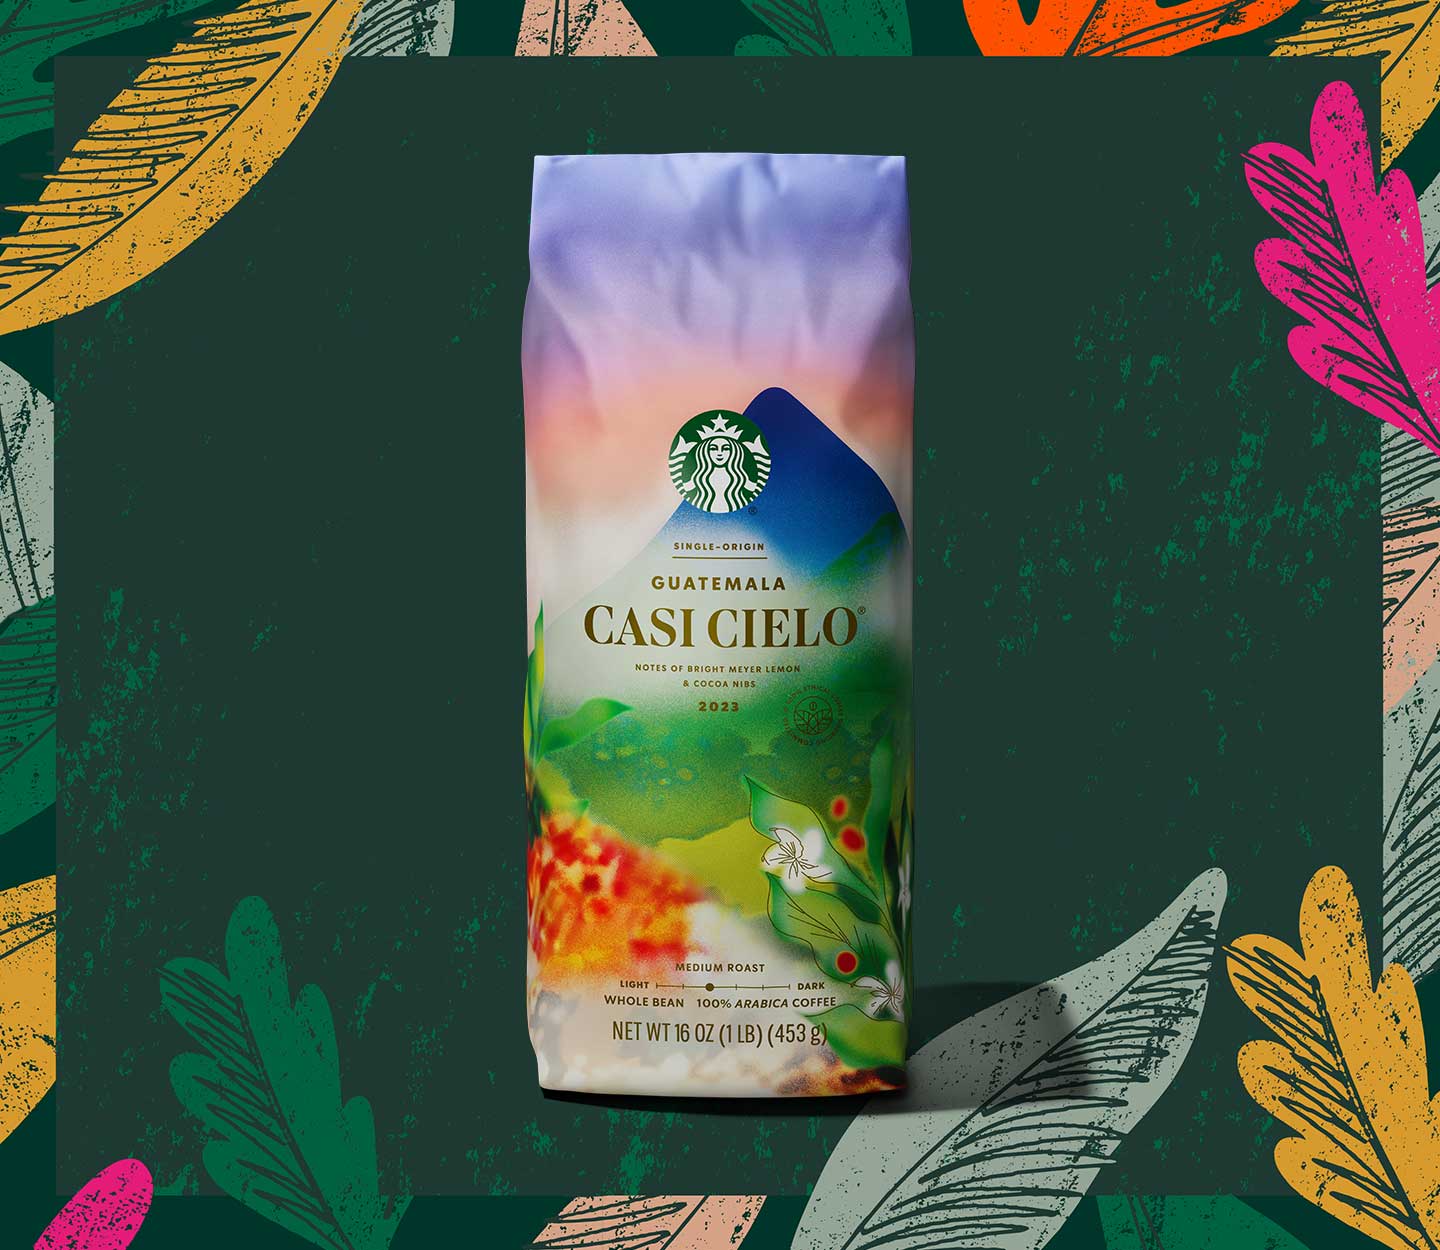 A coffee bag with a tropical, mountainous illustration surrounded by graphic leaves.